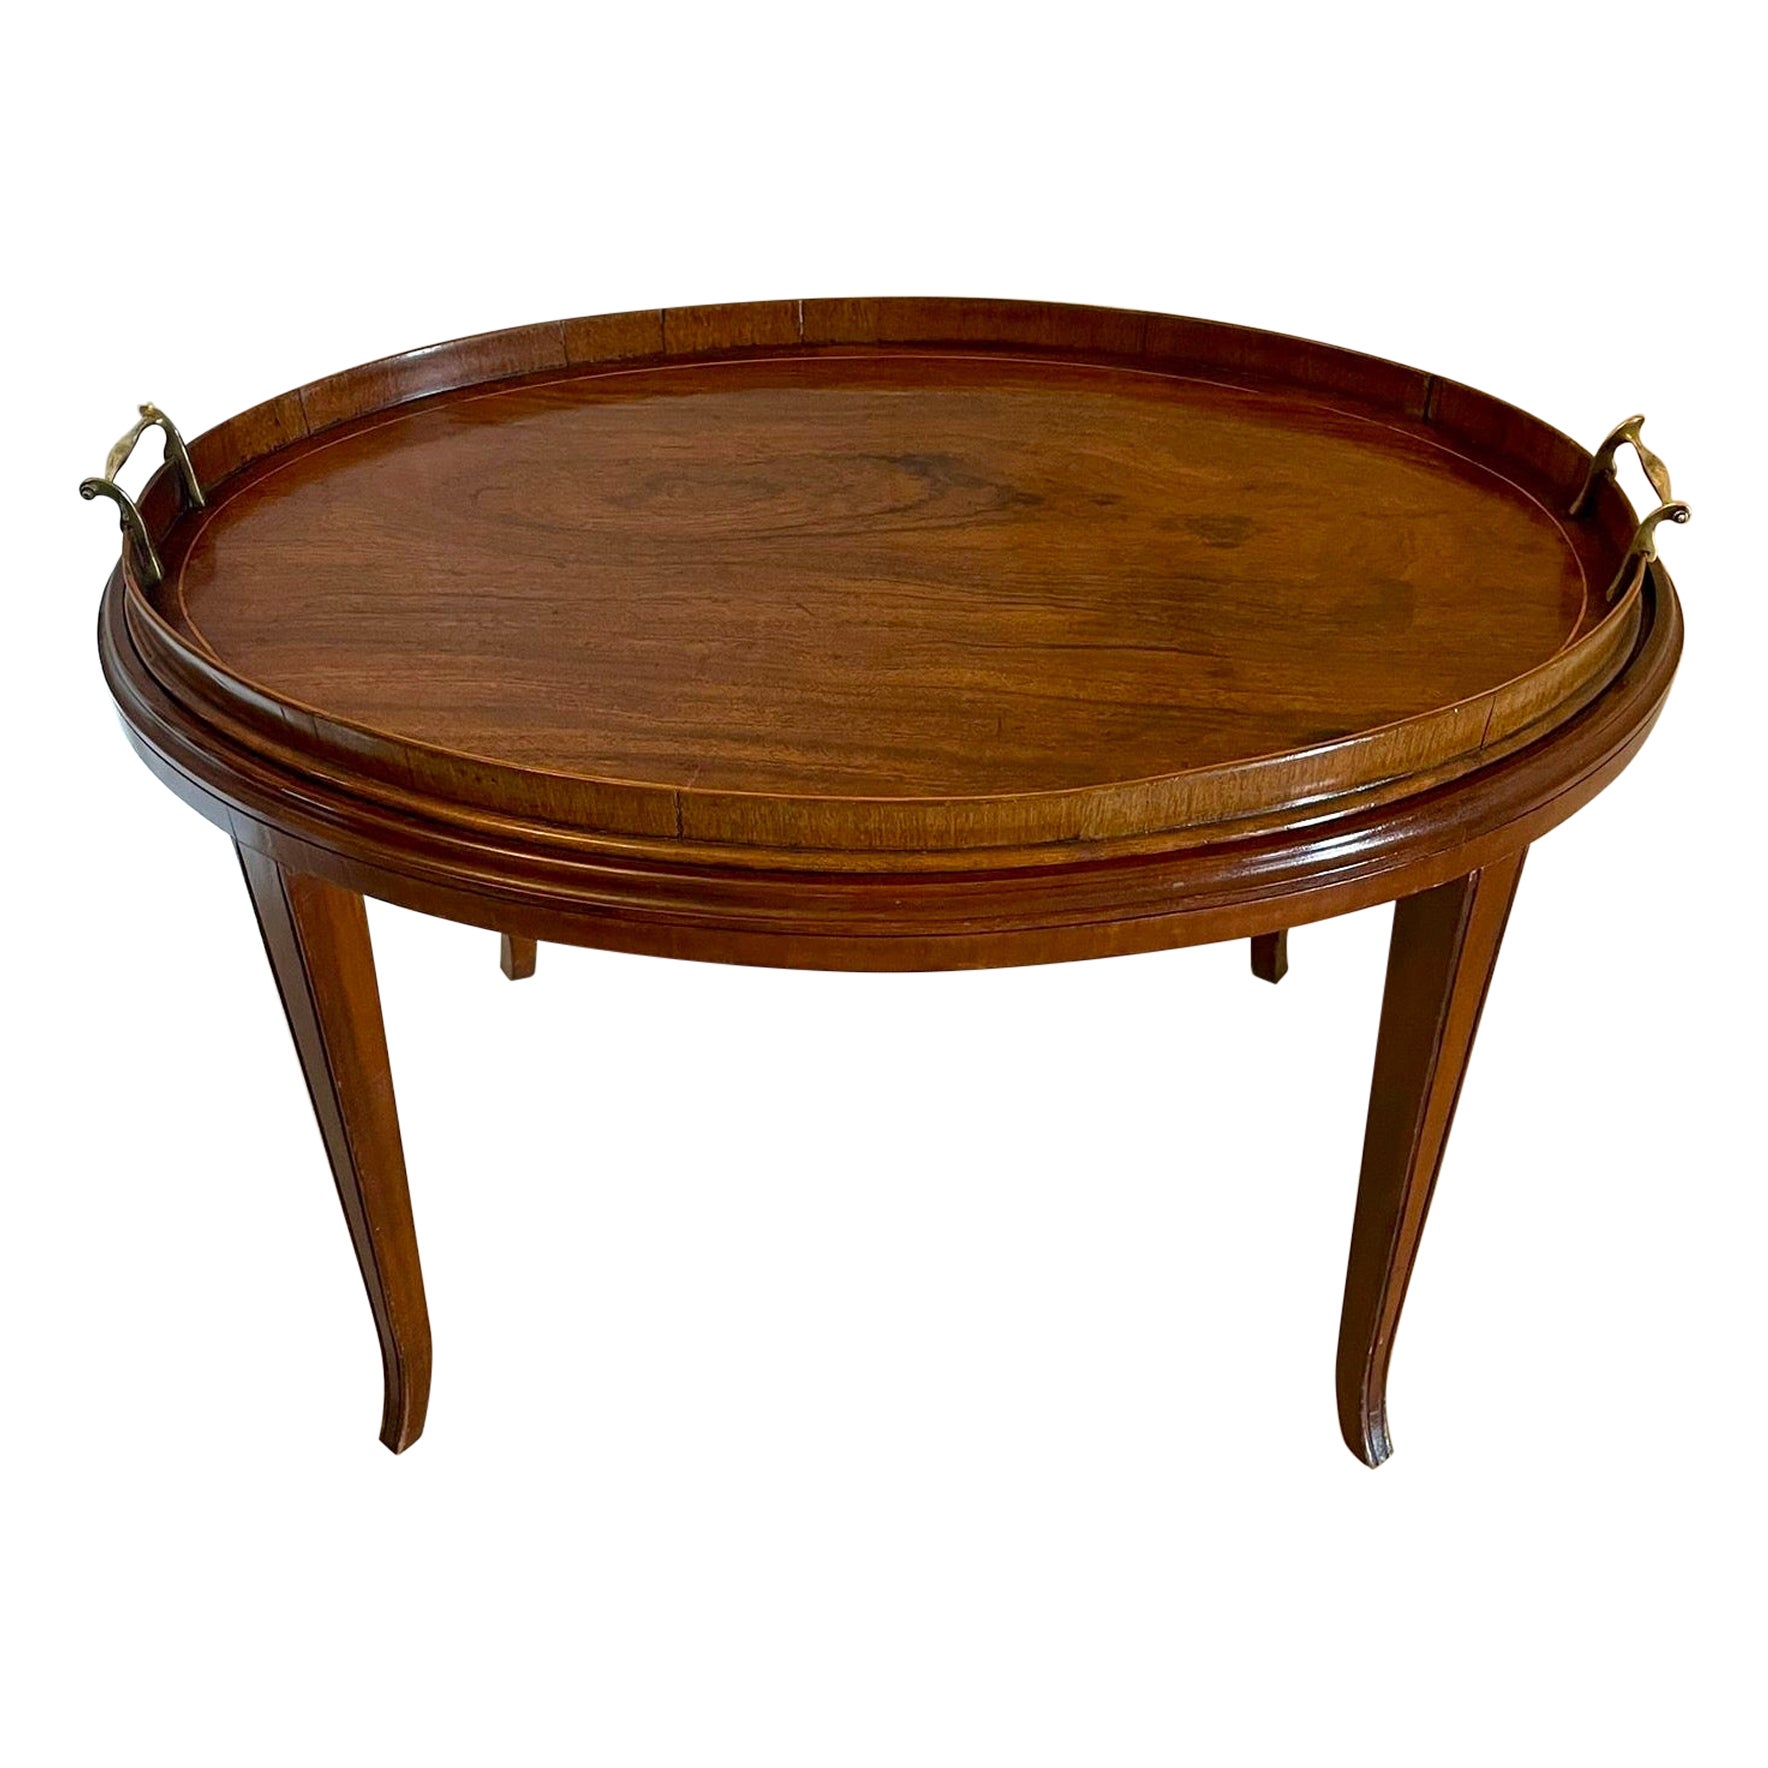 Large Antique Edwardian Oval Quality Figured Mahogany Tea Tray on Stand  For Sale